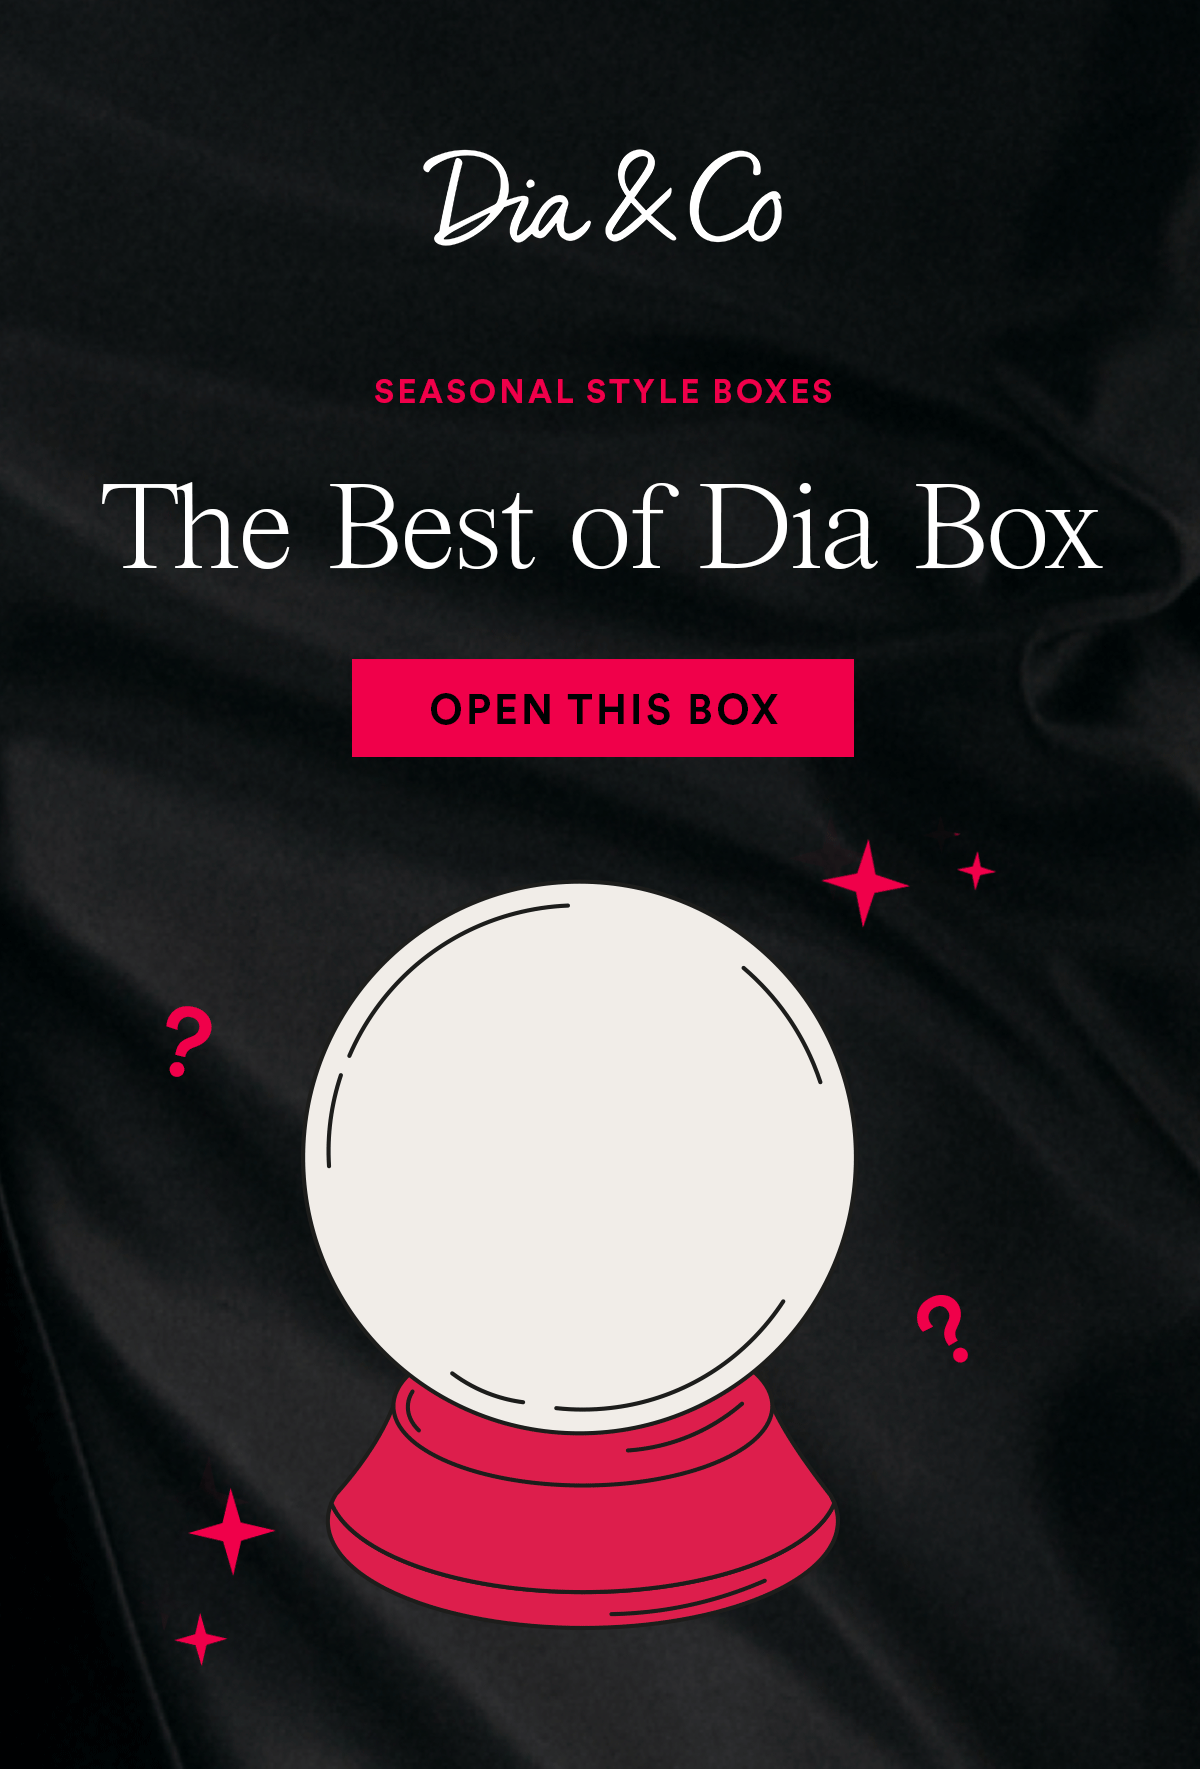 The Best of Dia Box. Open This Box